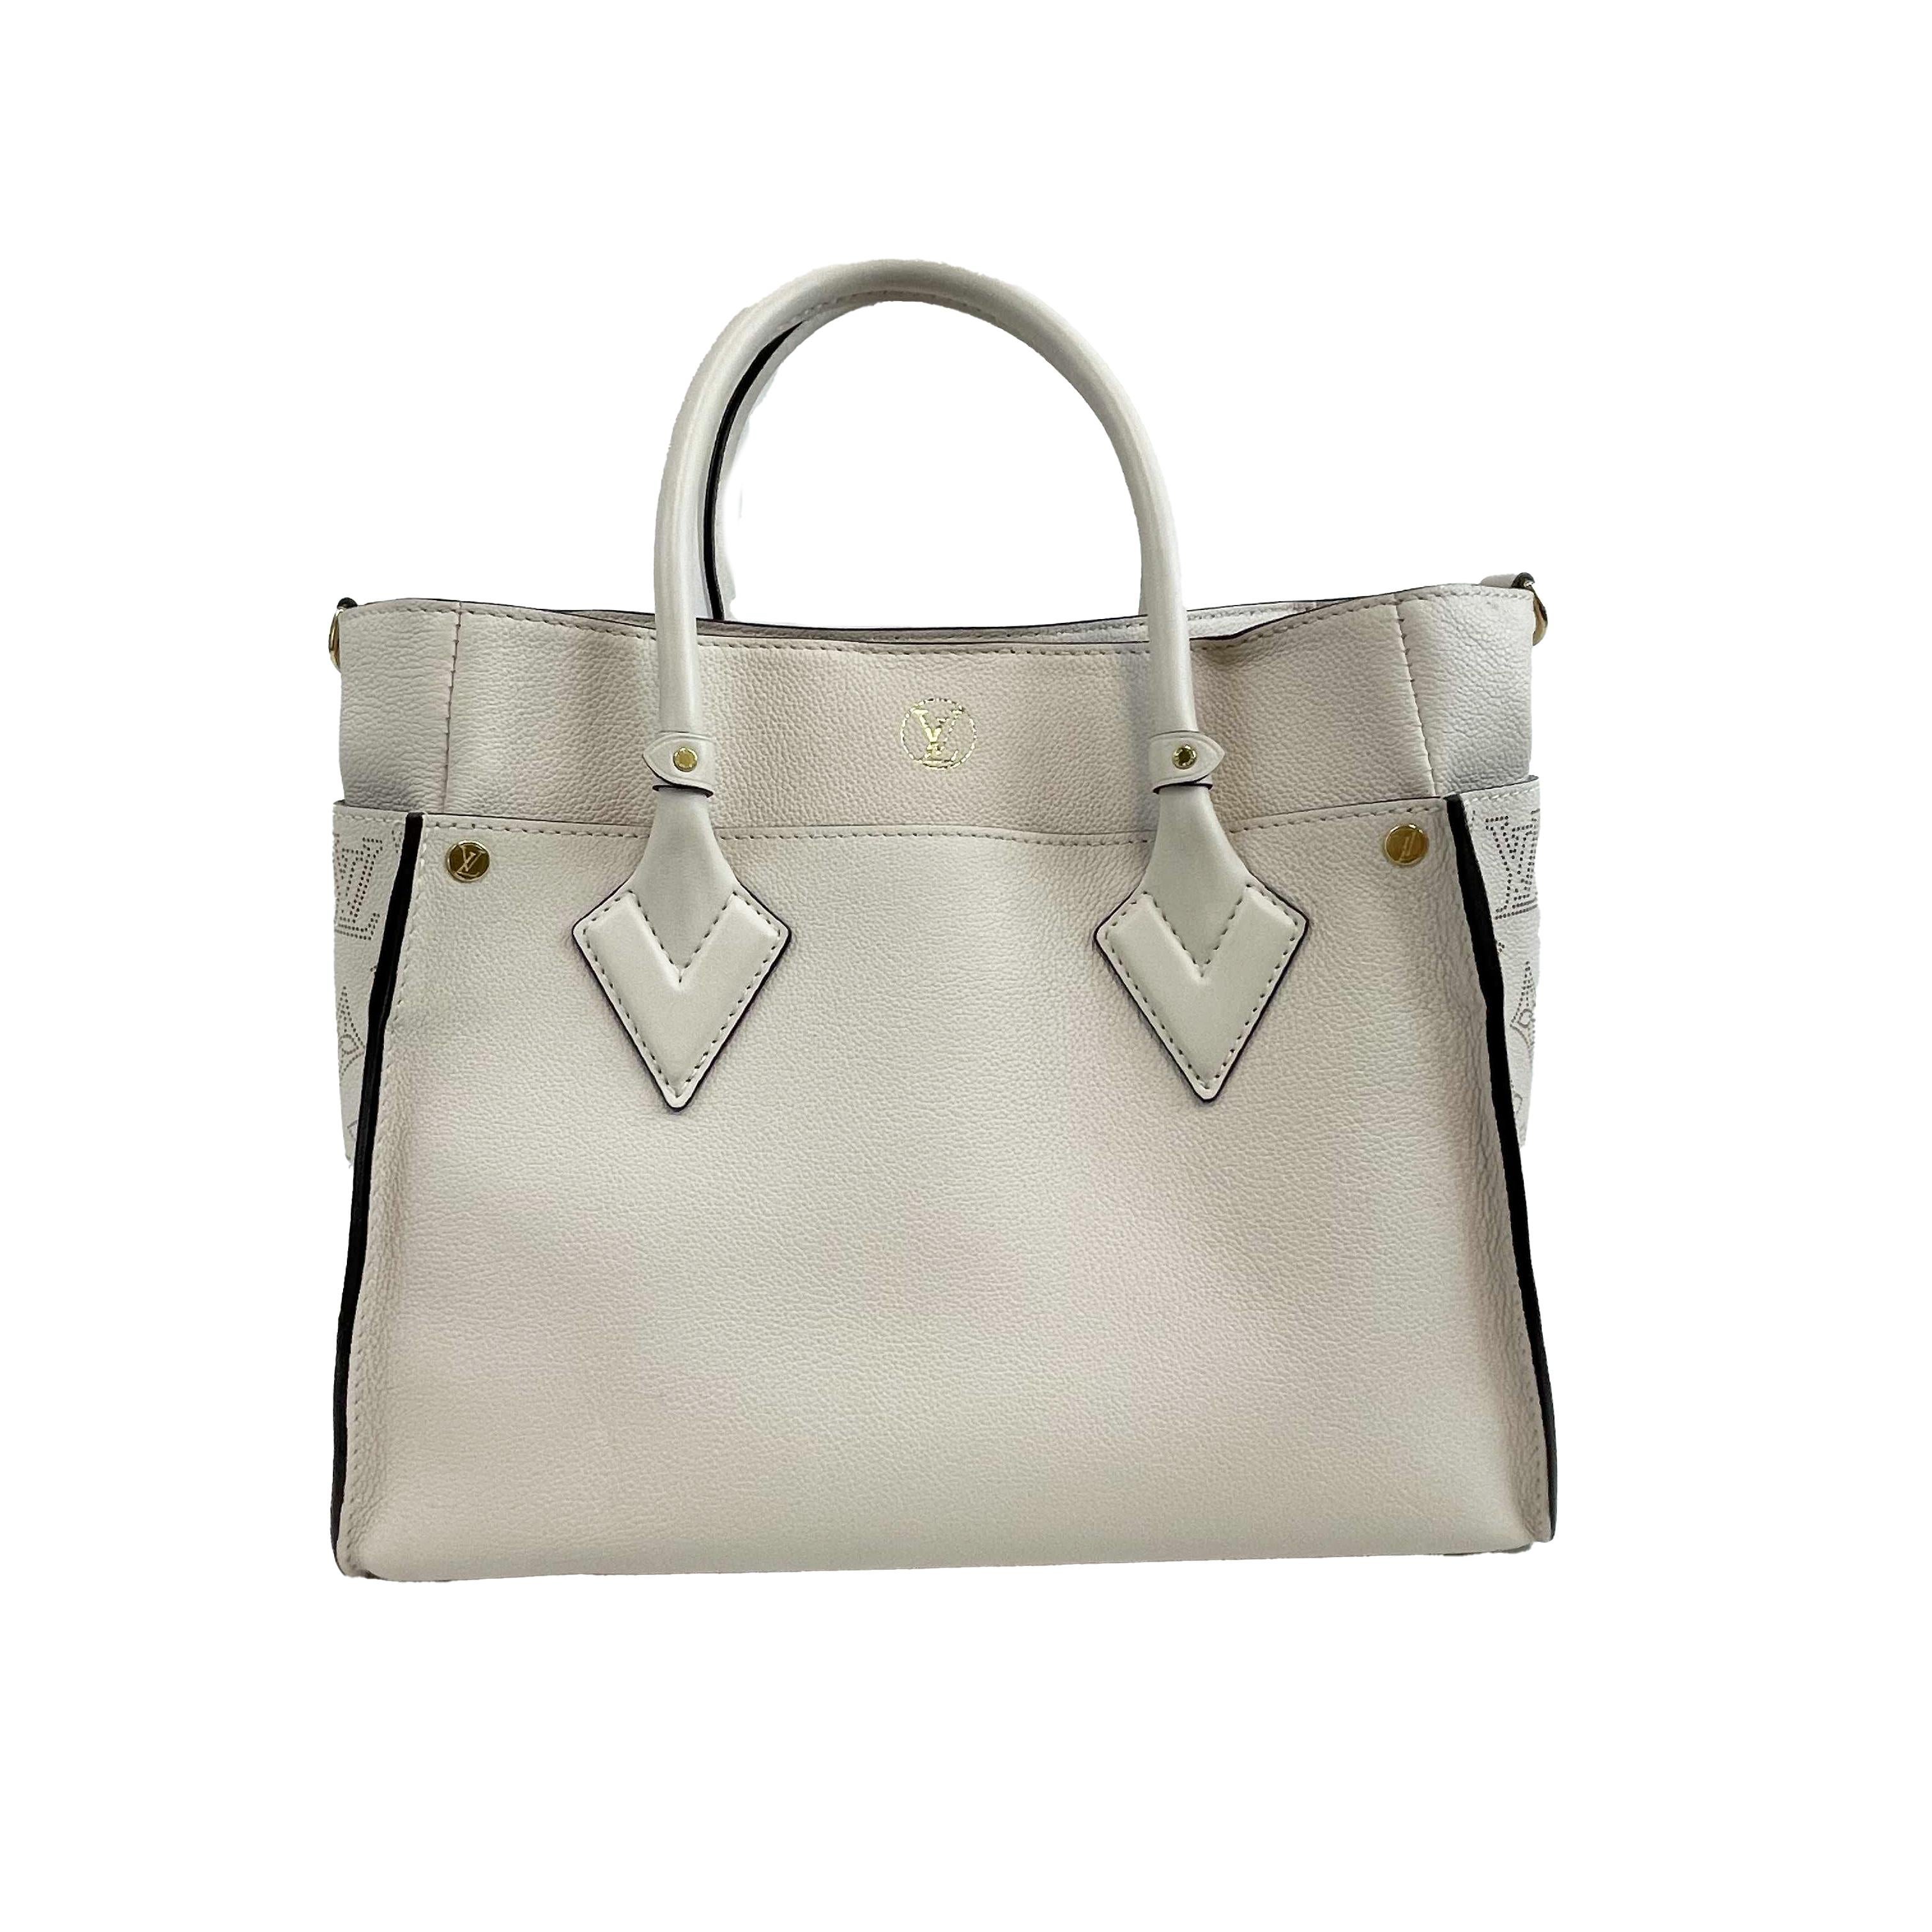 Louis Vuitton - Excellent - On My Side MM - Beige - Handbag

Description

* Calfskin
* Cowhide-leather trim
* Microfiber lining
* Gold-color hardware
* Turn lock closure
* 2 outside pockets on the side
* 2 outside pockets on the front and back